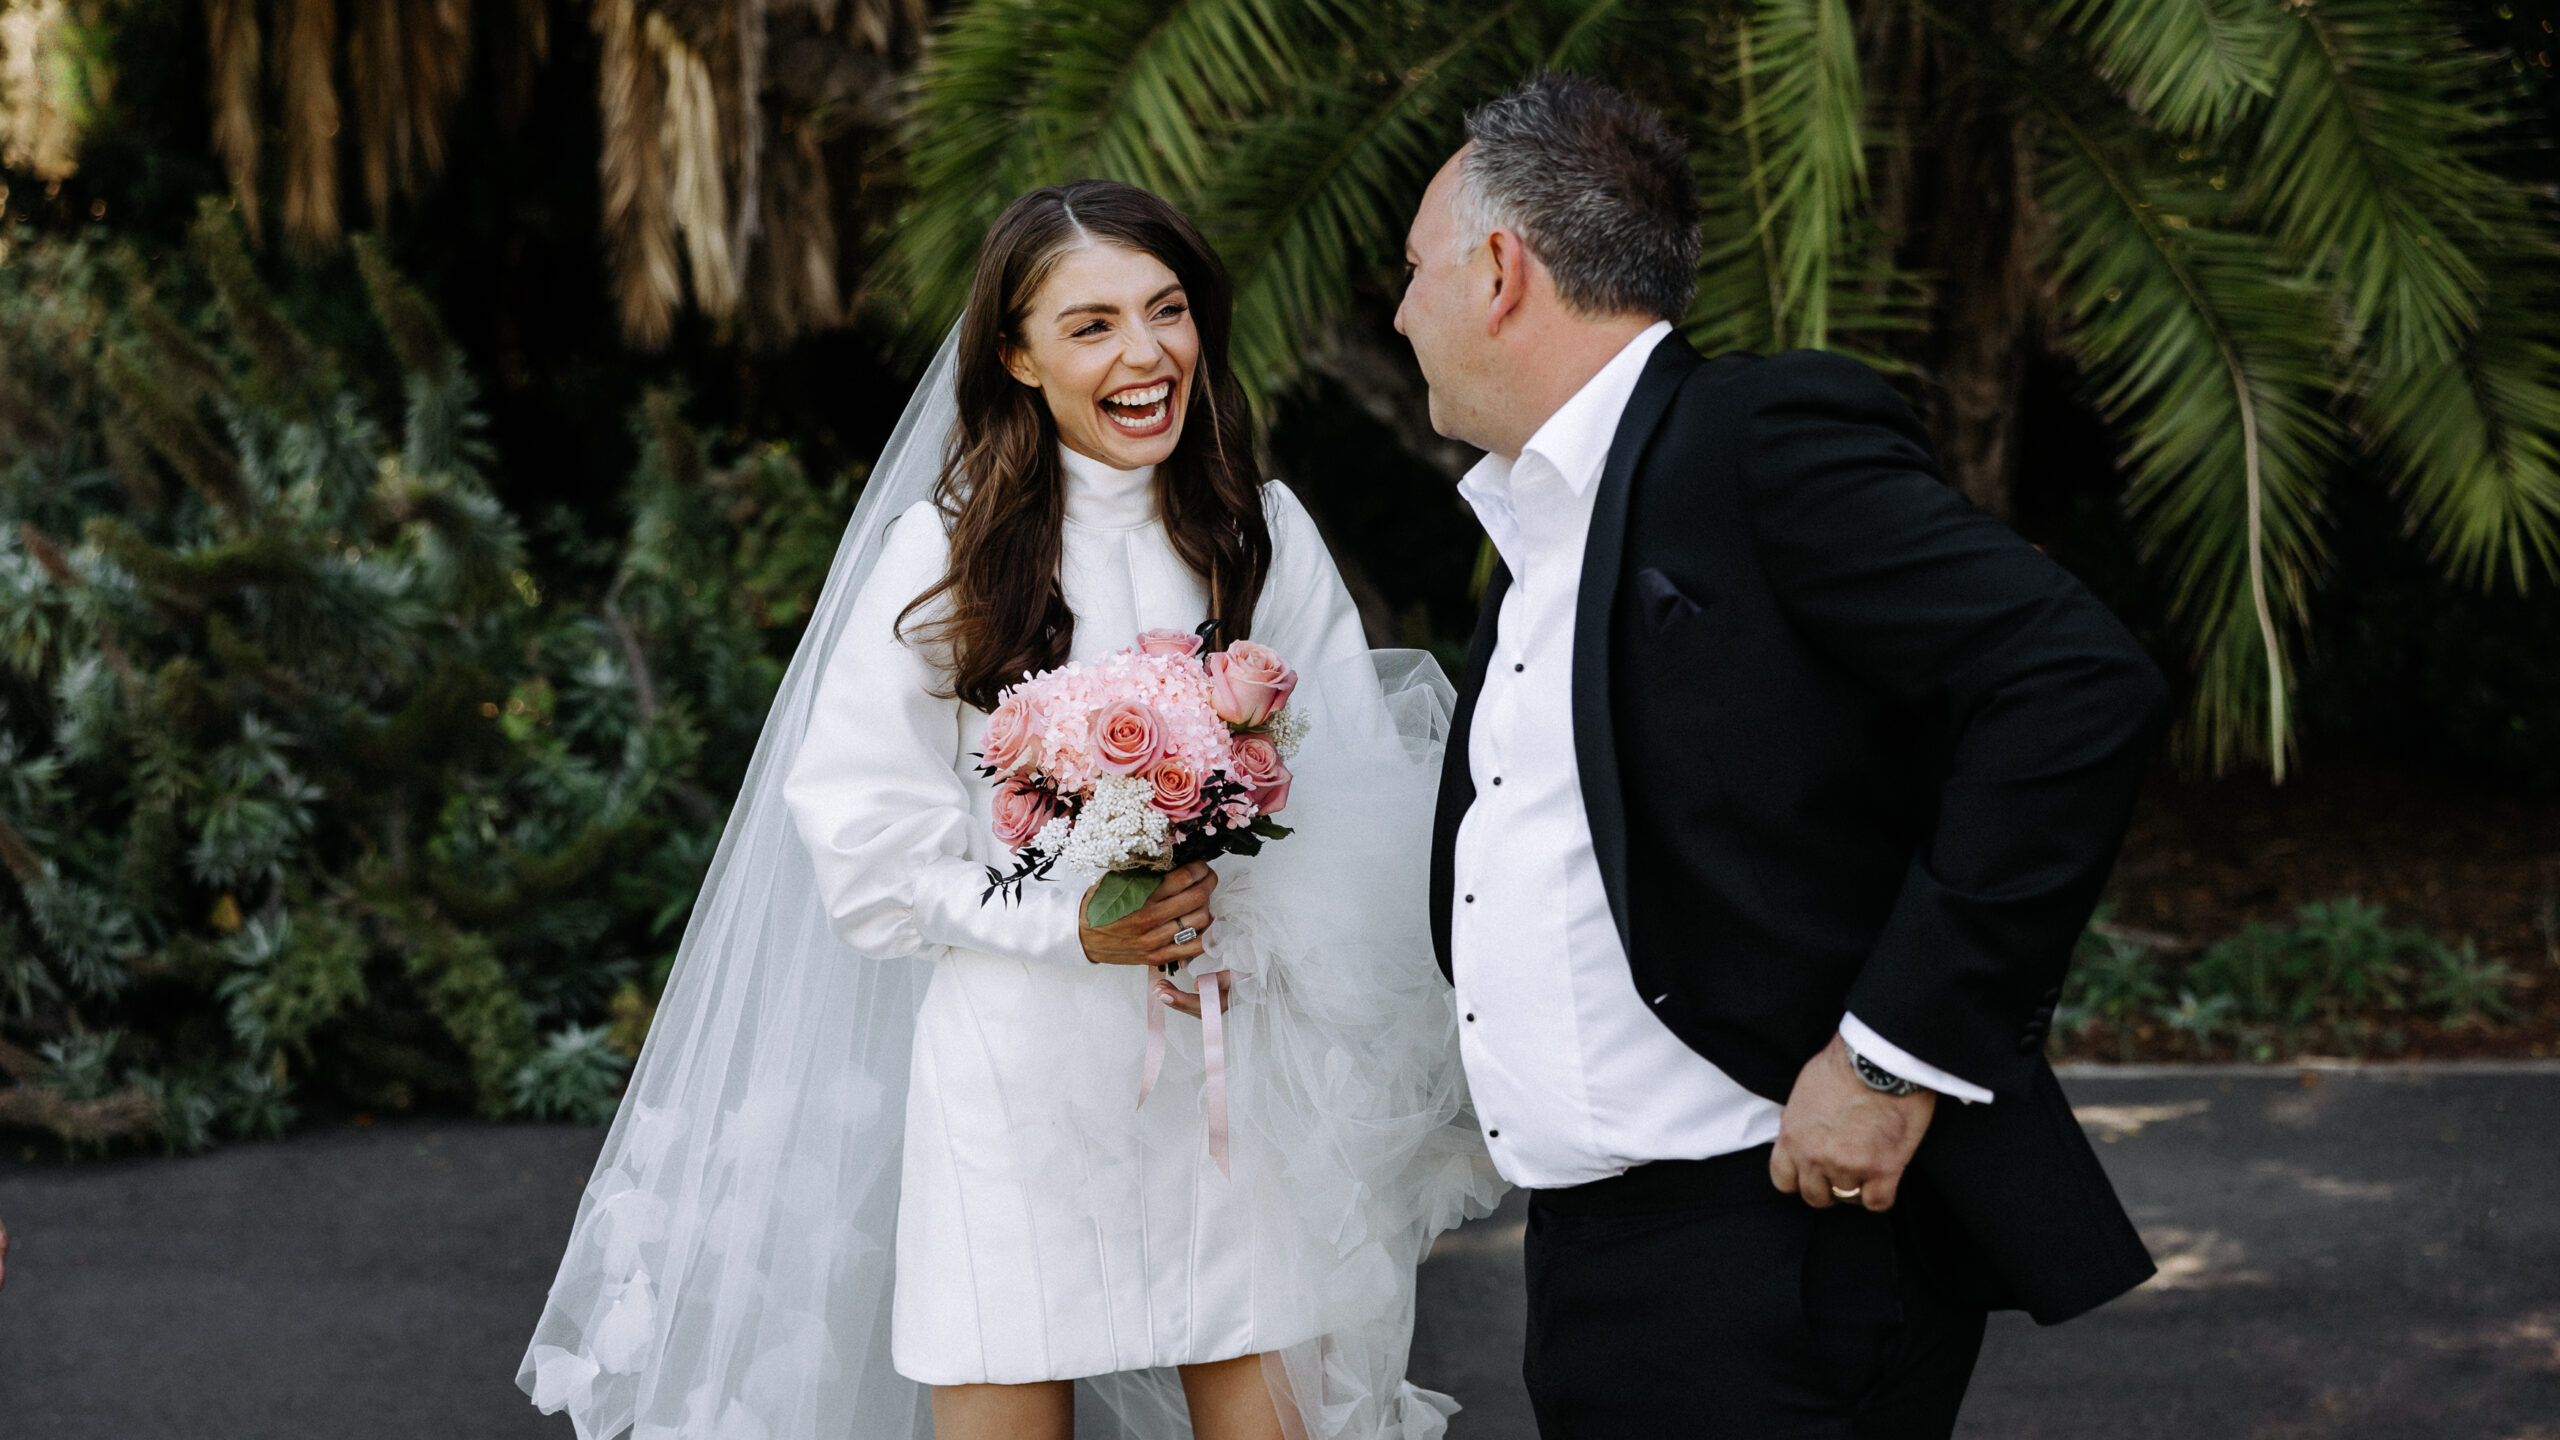 Bride laughing with her groom at the Adelaide Botanic Gardens after their wedding ceremony